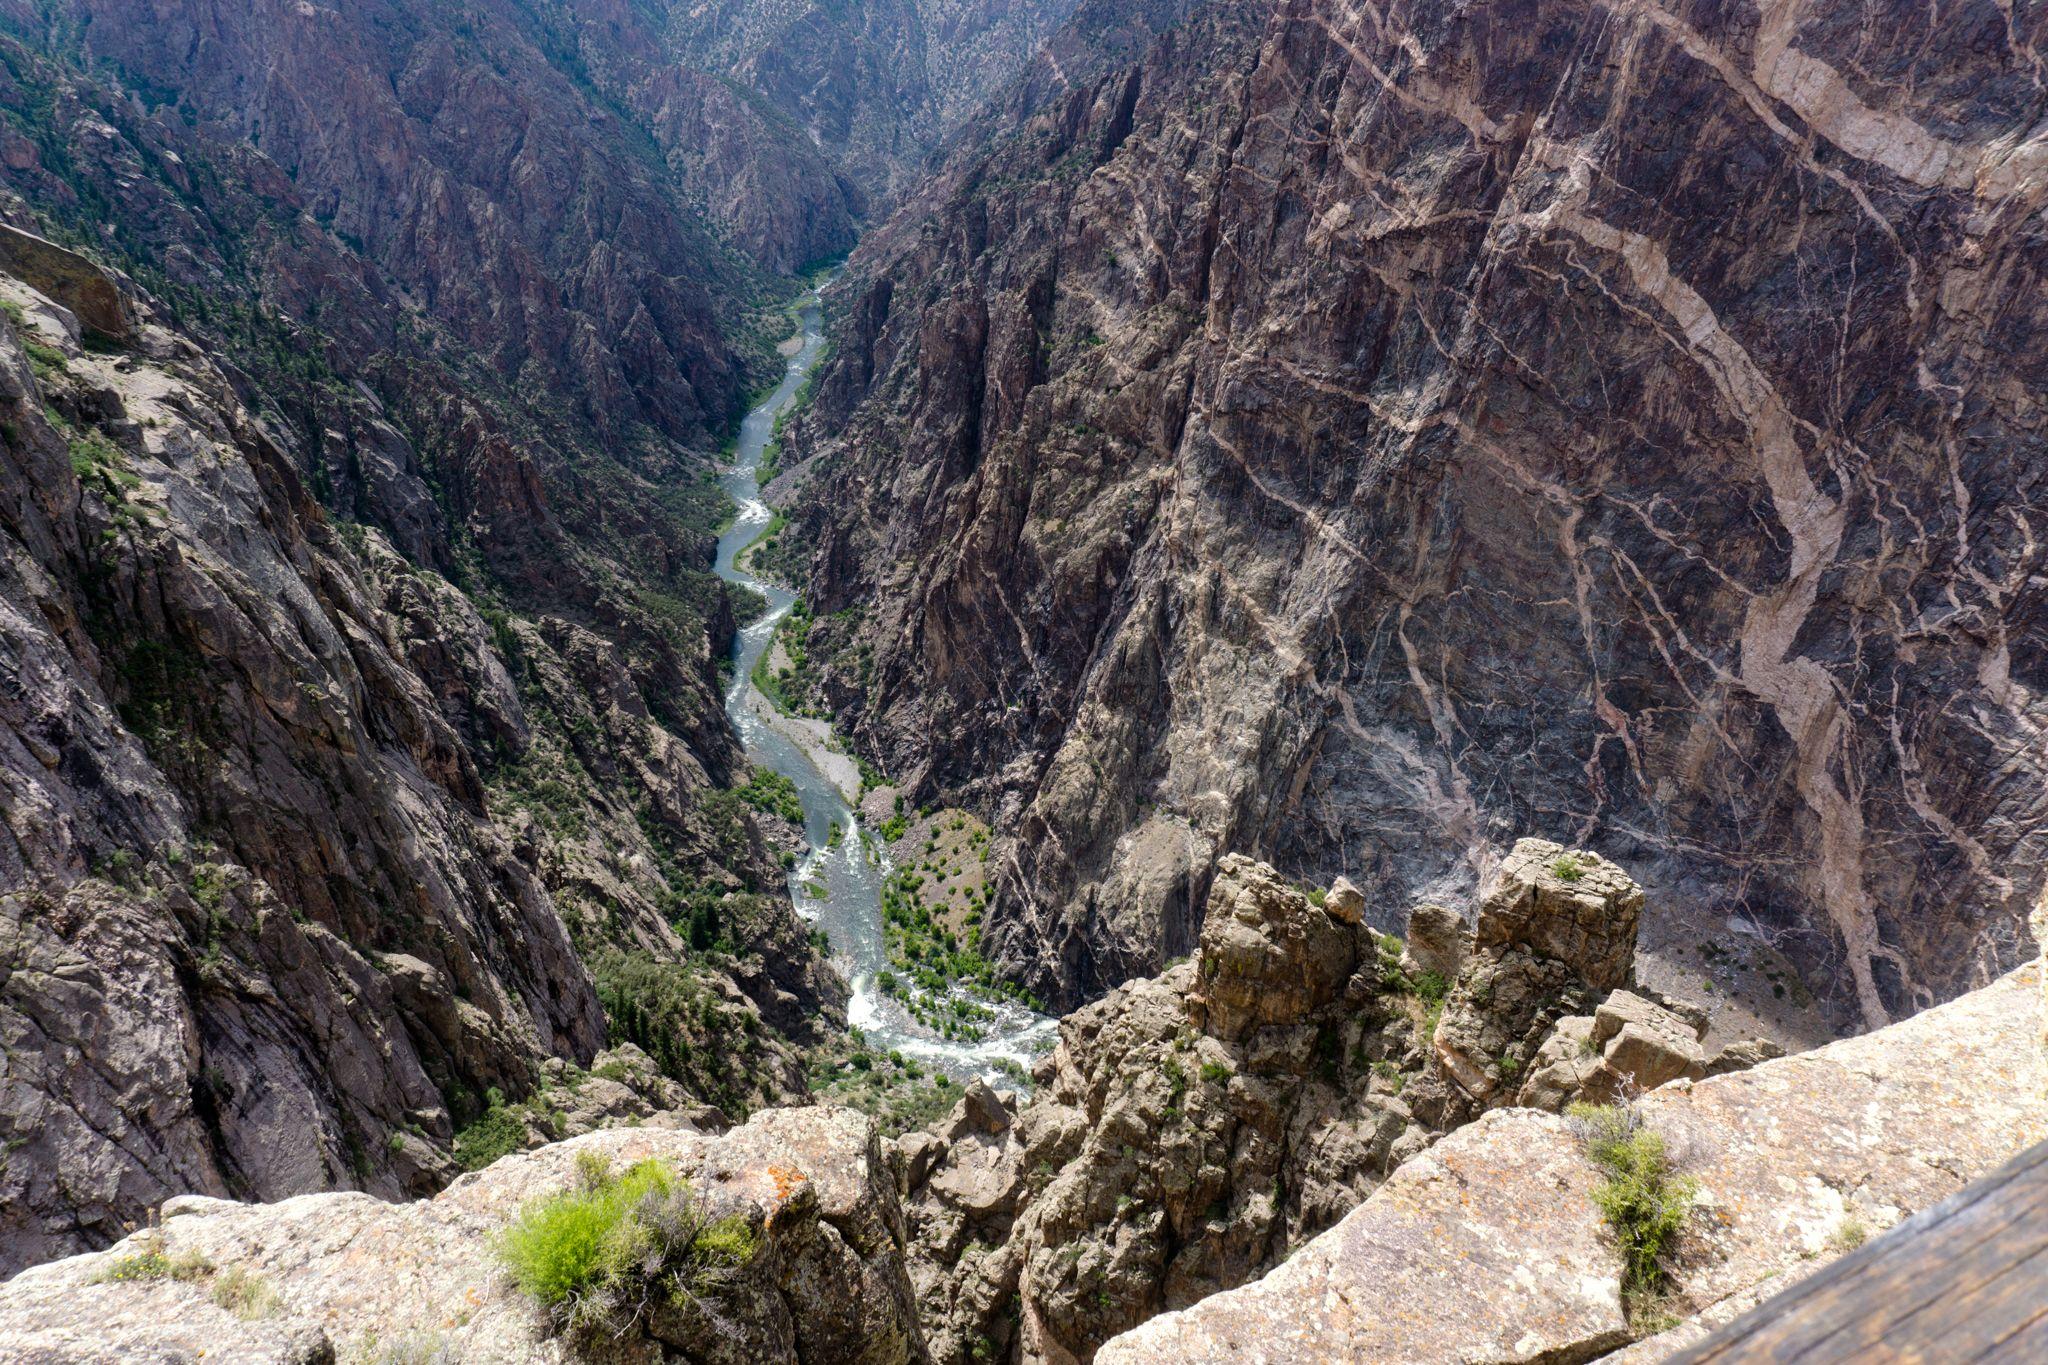 The Black Canyon of the Gunnison Is Really More of a Dark Russet